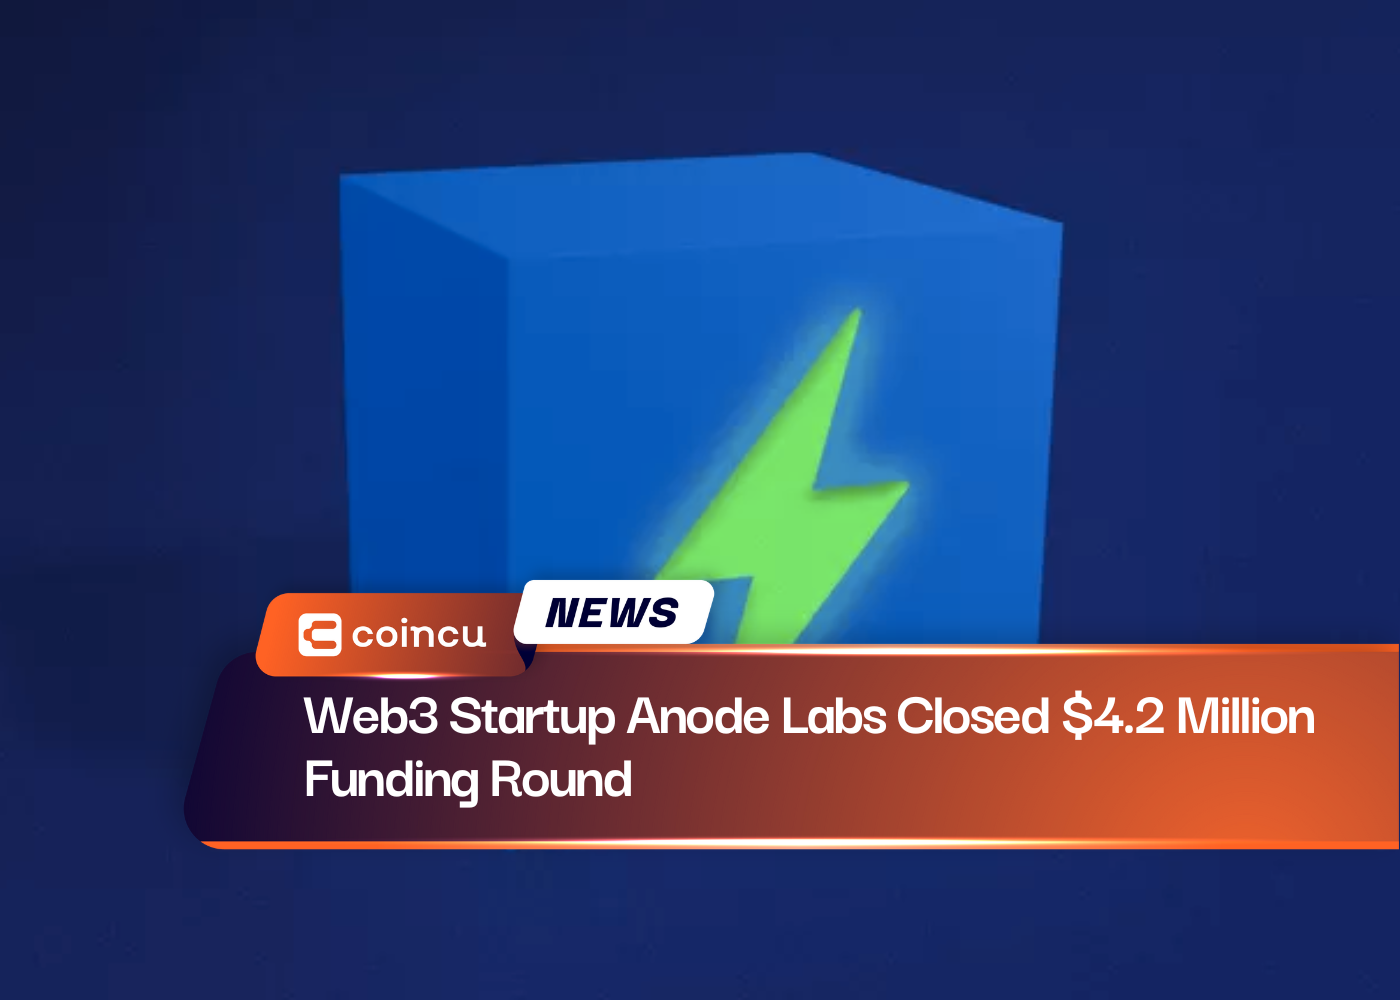 Web3 Startup Anode Labs Closed $4.2 Million Funding Round